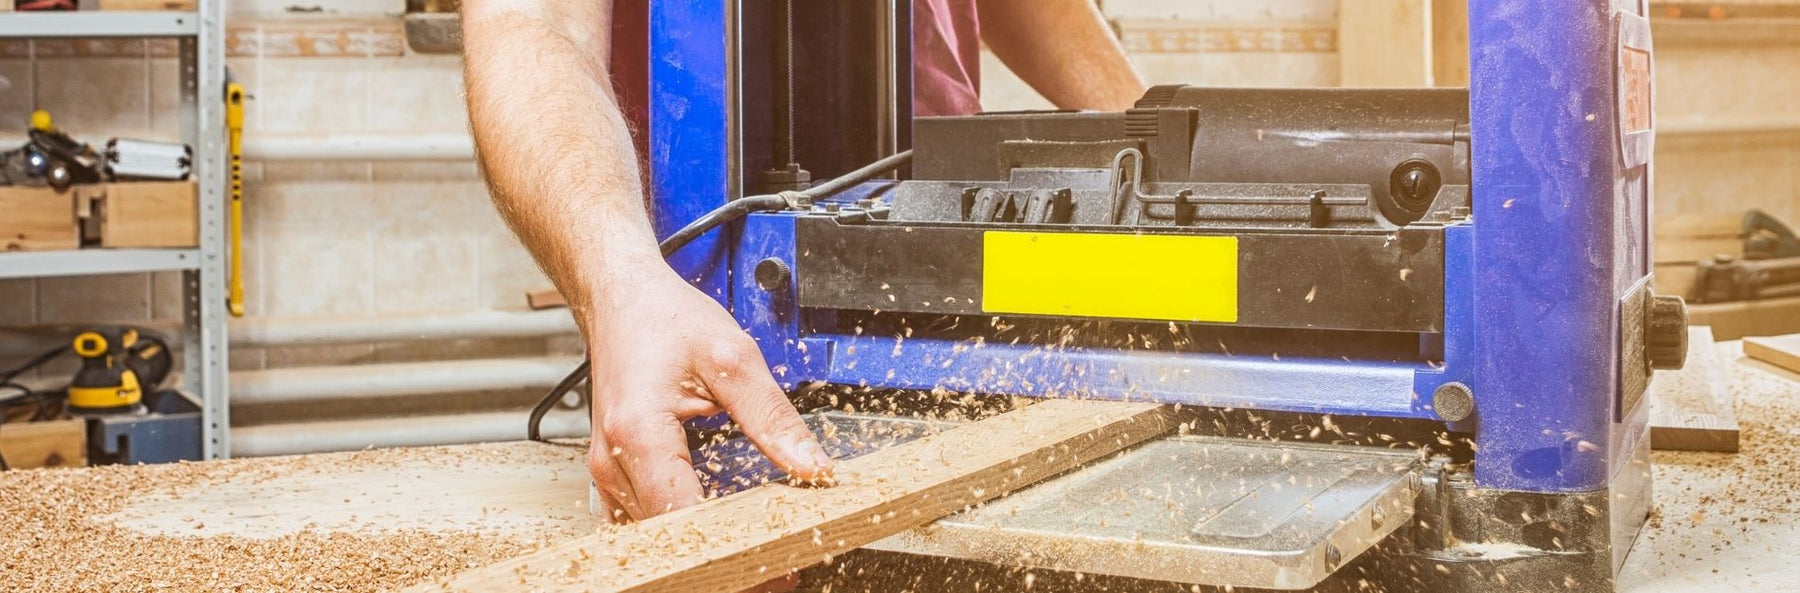 Which Power Tools Are Essential in a Woodworker’s Shop?